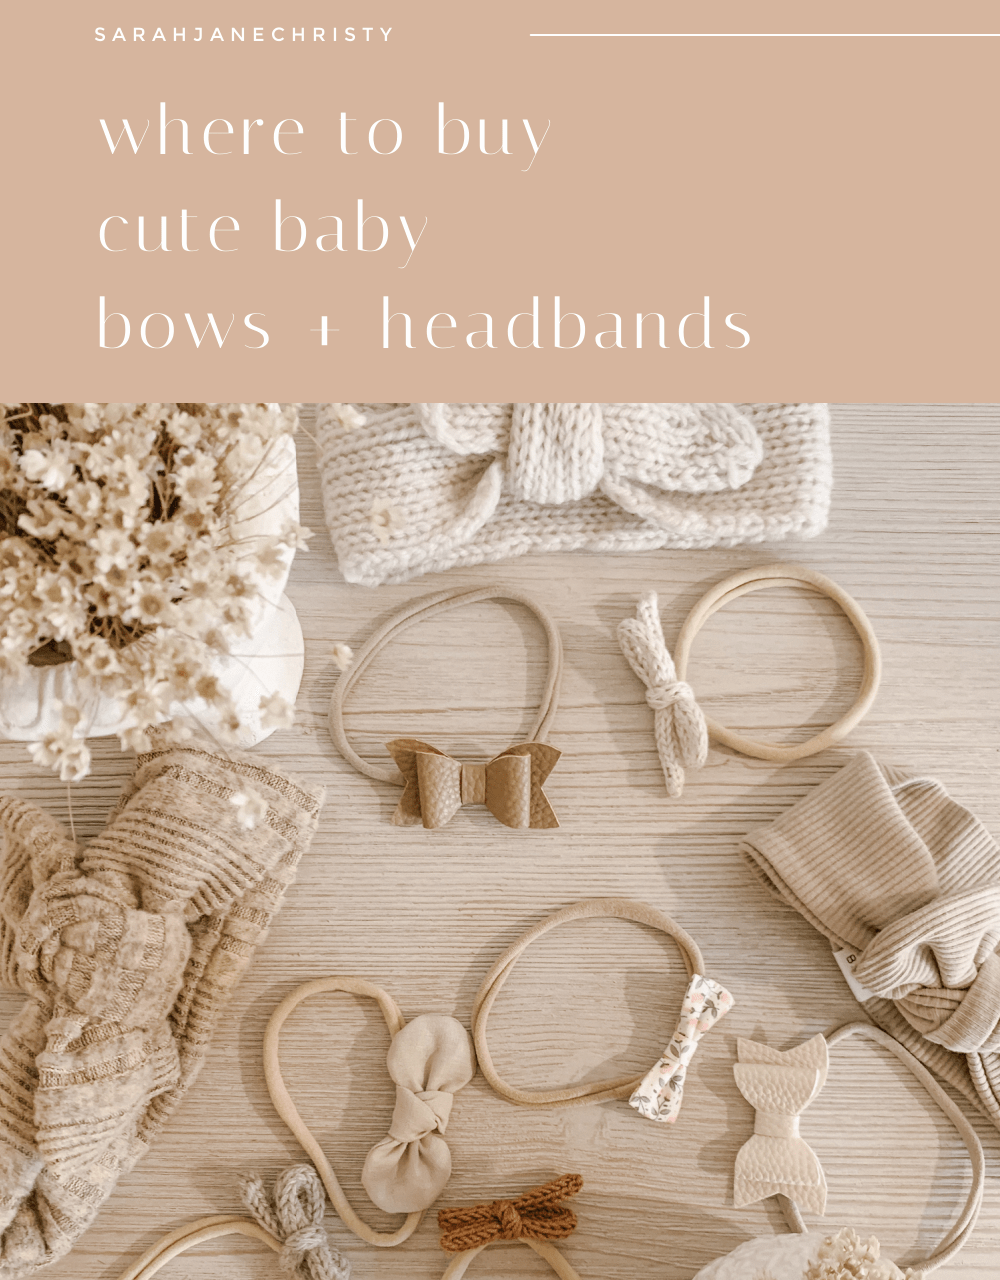 Where to Buy Cute Baby Bows and Headbands Online